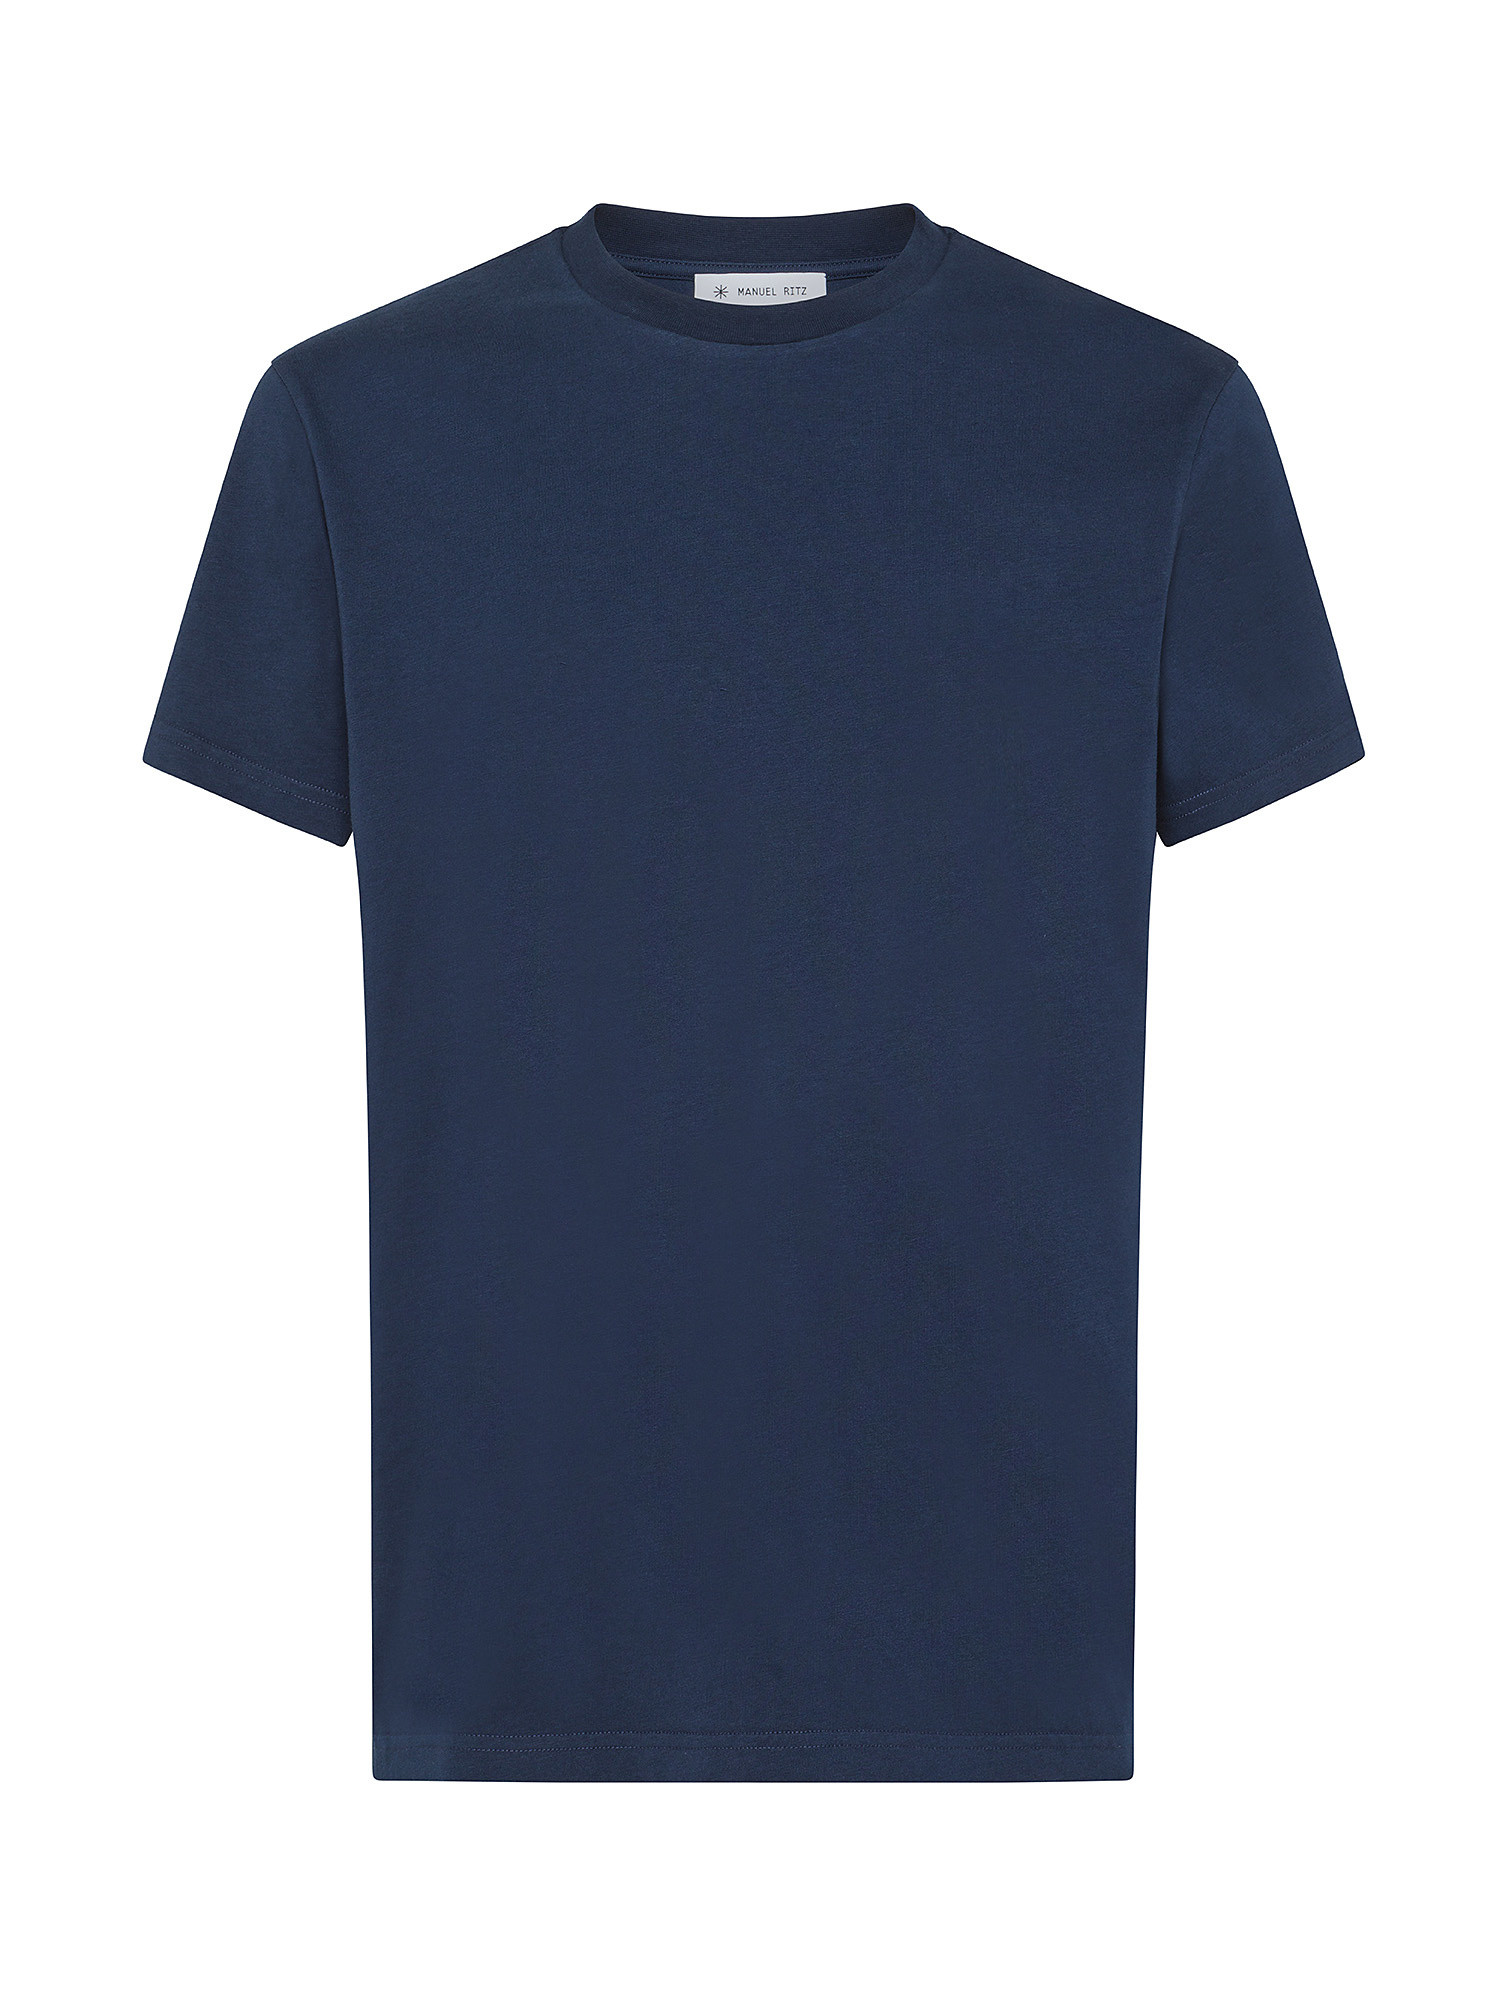 Manuel Ritz - T-shirt in cotone, Blu scuro, large image number 0